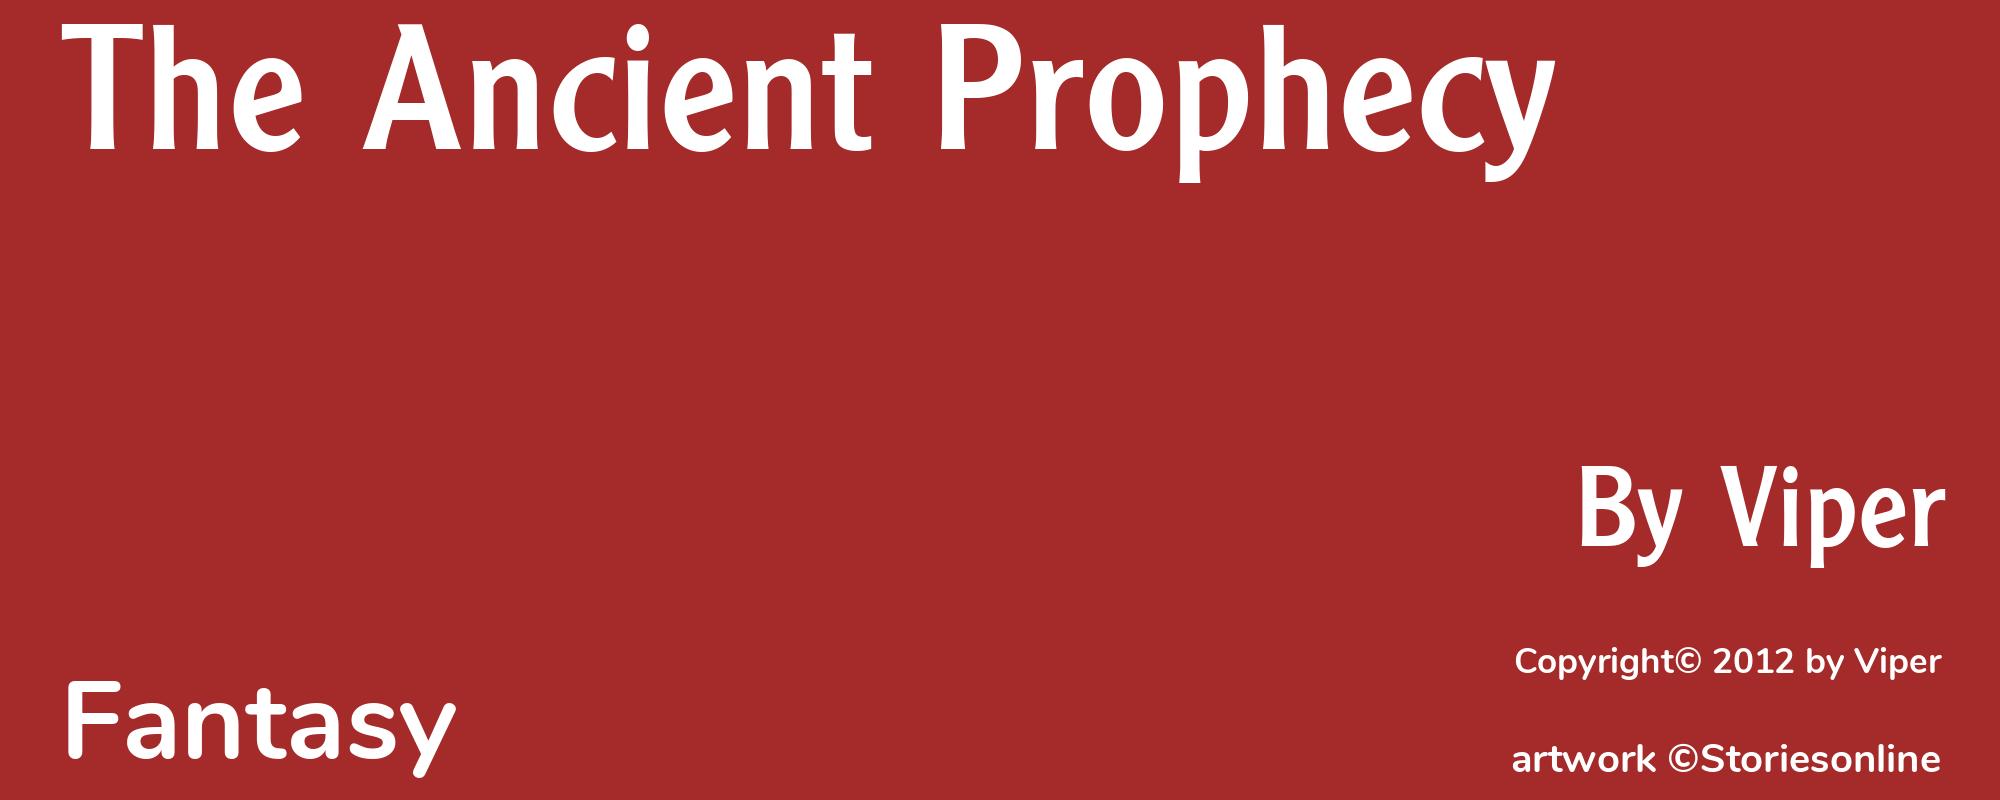 The Ancient Prophecy - Cover